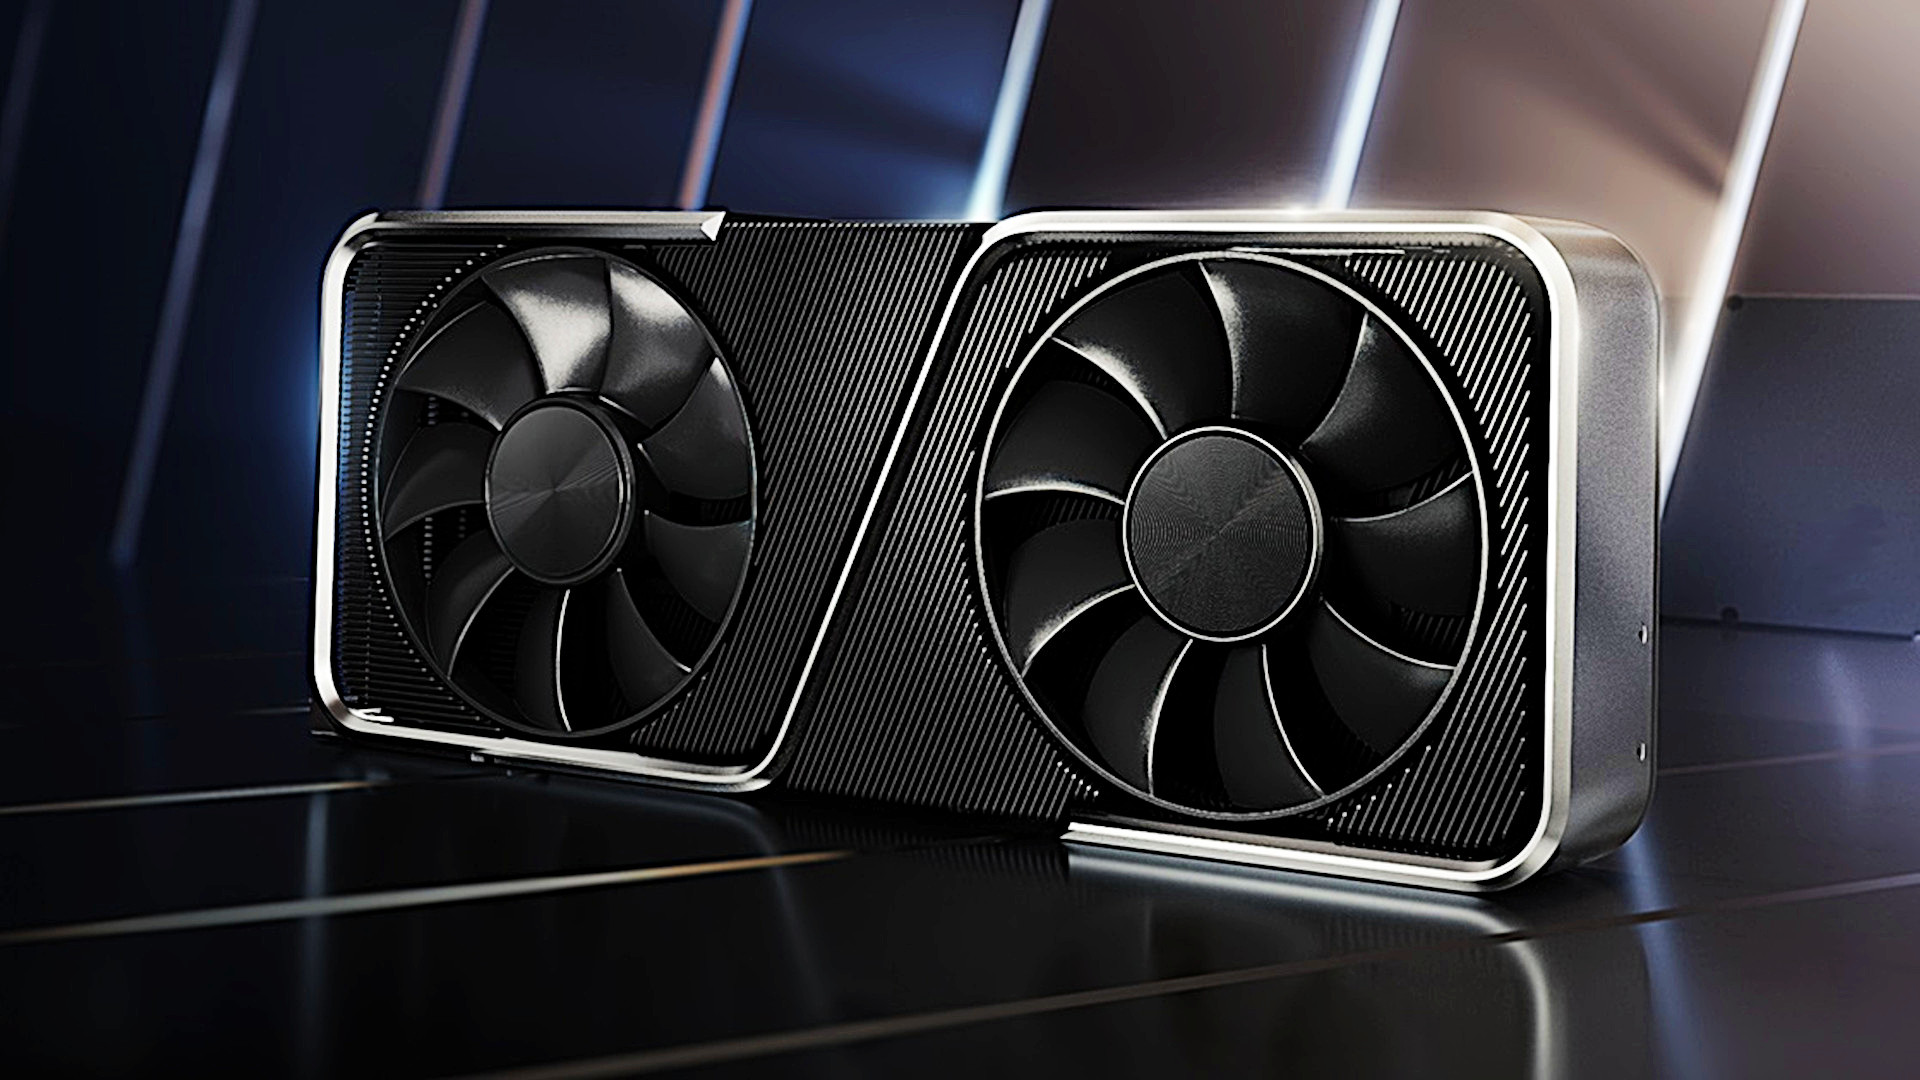 Just one Nvidia GeForce RTX 4000 GPU may launch this year